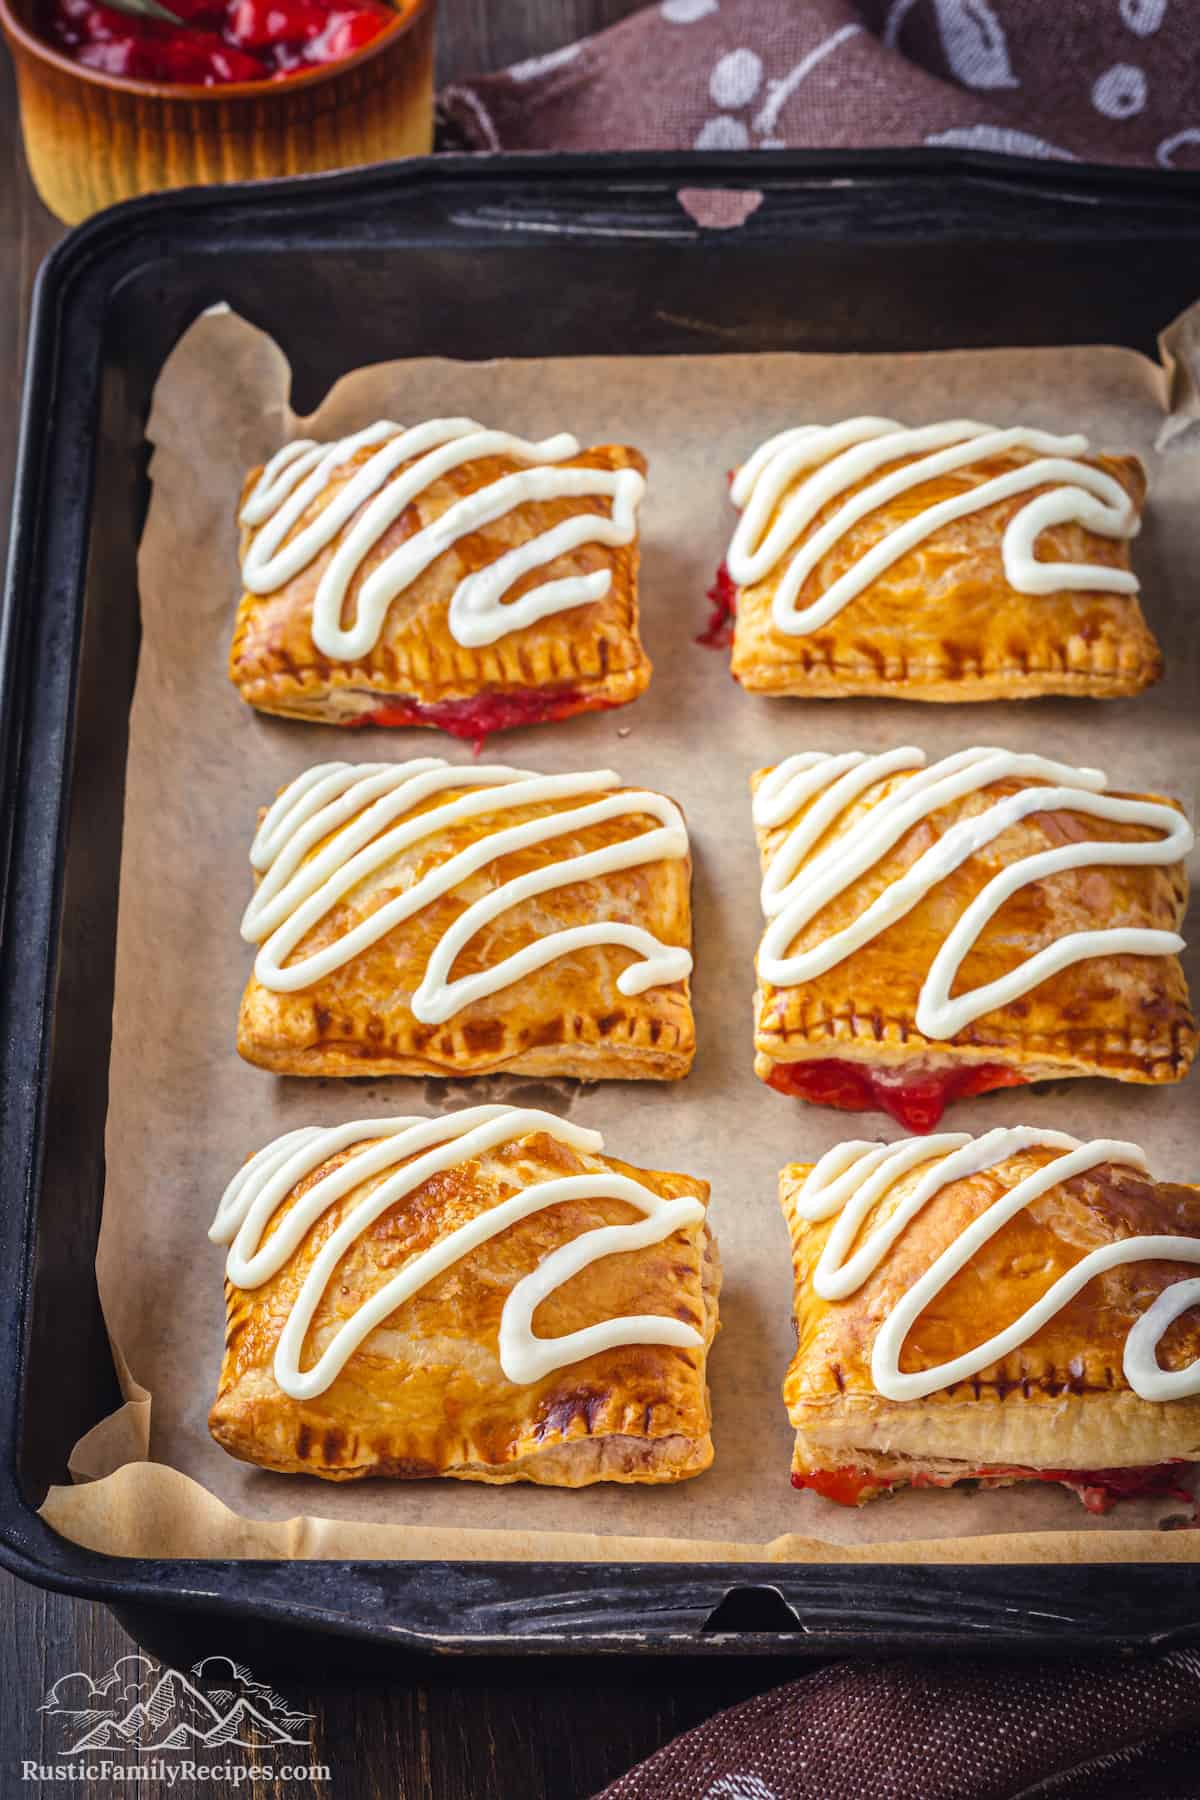 Baked strawberry toaster strudels on a baking sheet topped with squiggles of cream cheese frosting.